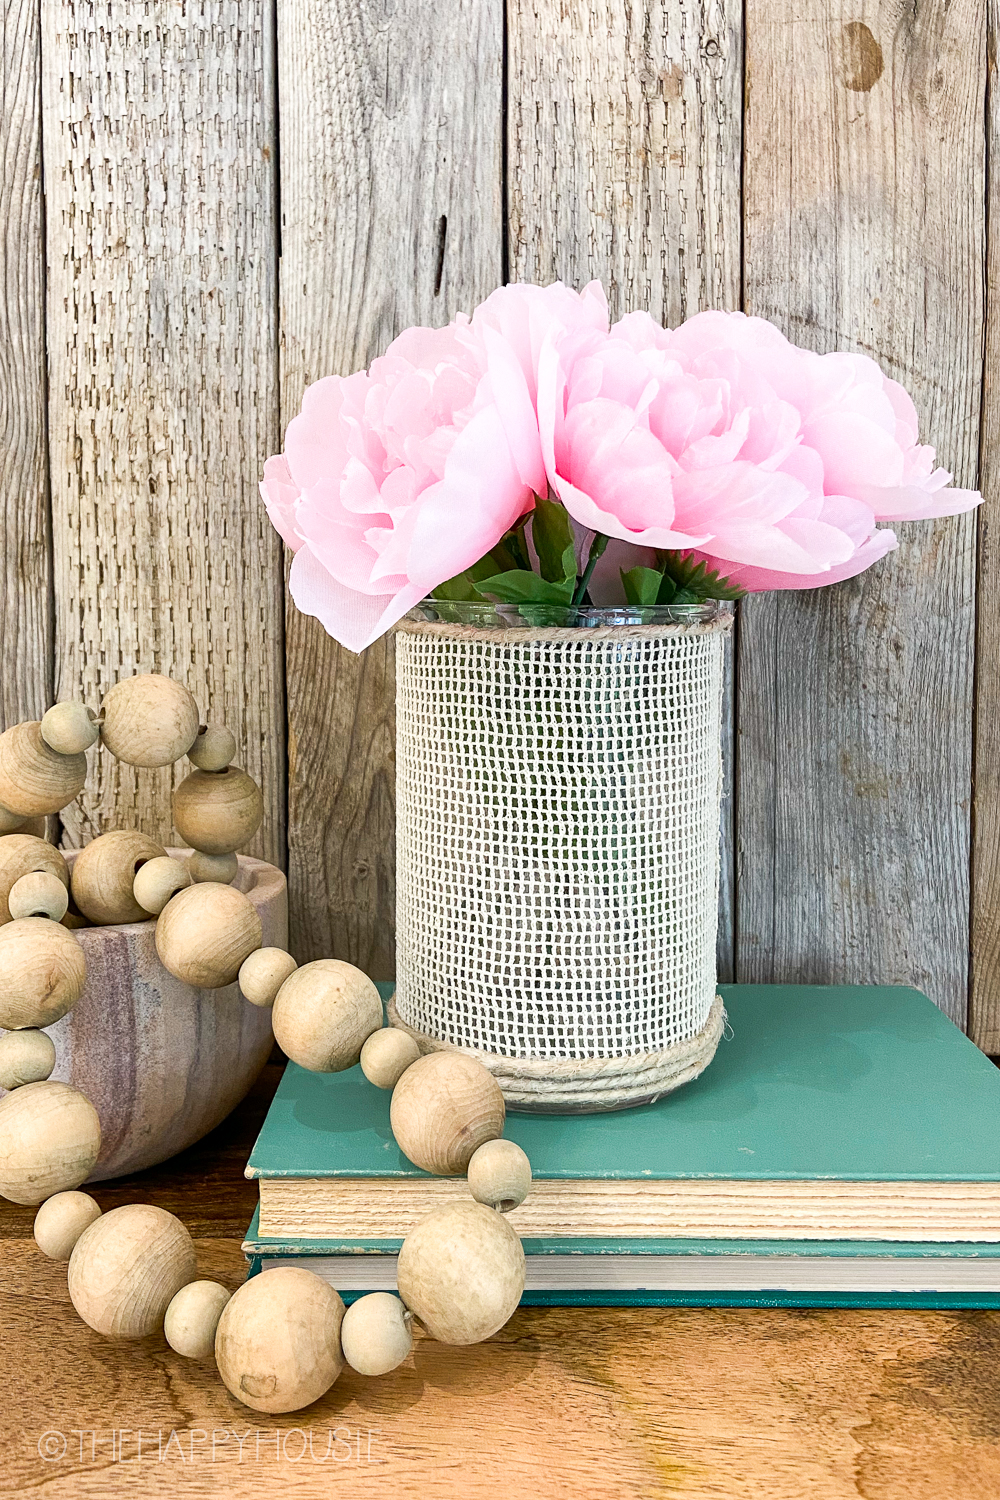 There are wooden beads beside the peonies in a vase.